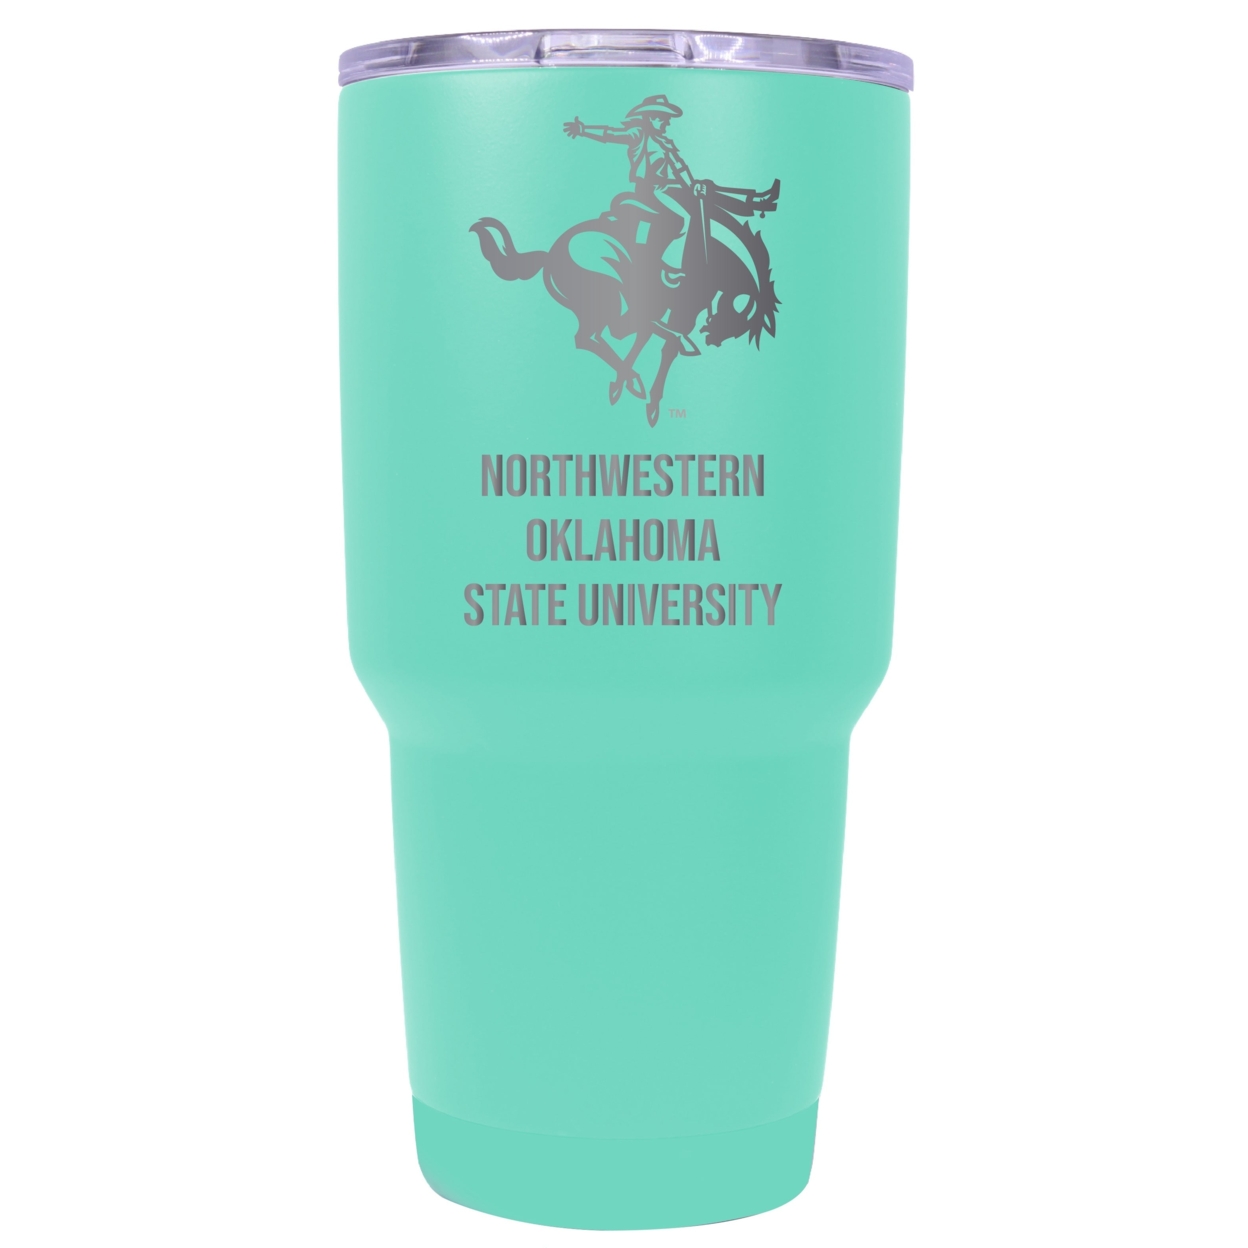 Northwestern Oklahoma State University 24 Oz Laser Engraved Stainless Steel Insulated Tumbler - Choose Your Color. - Red